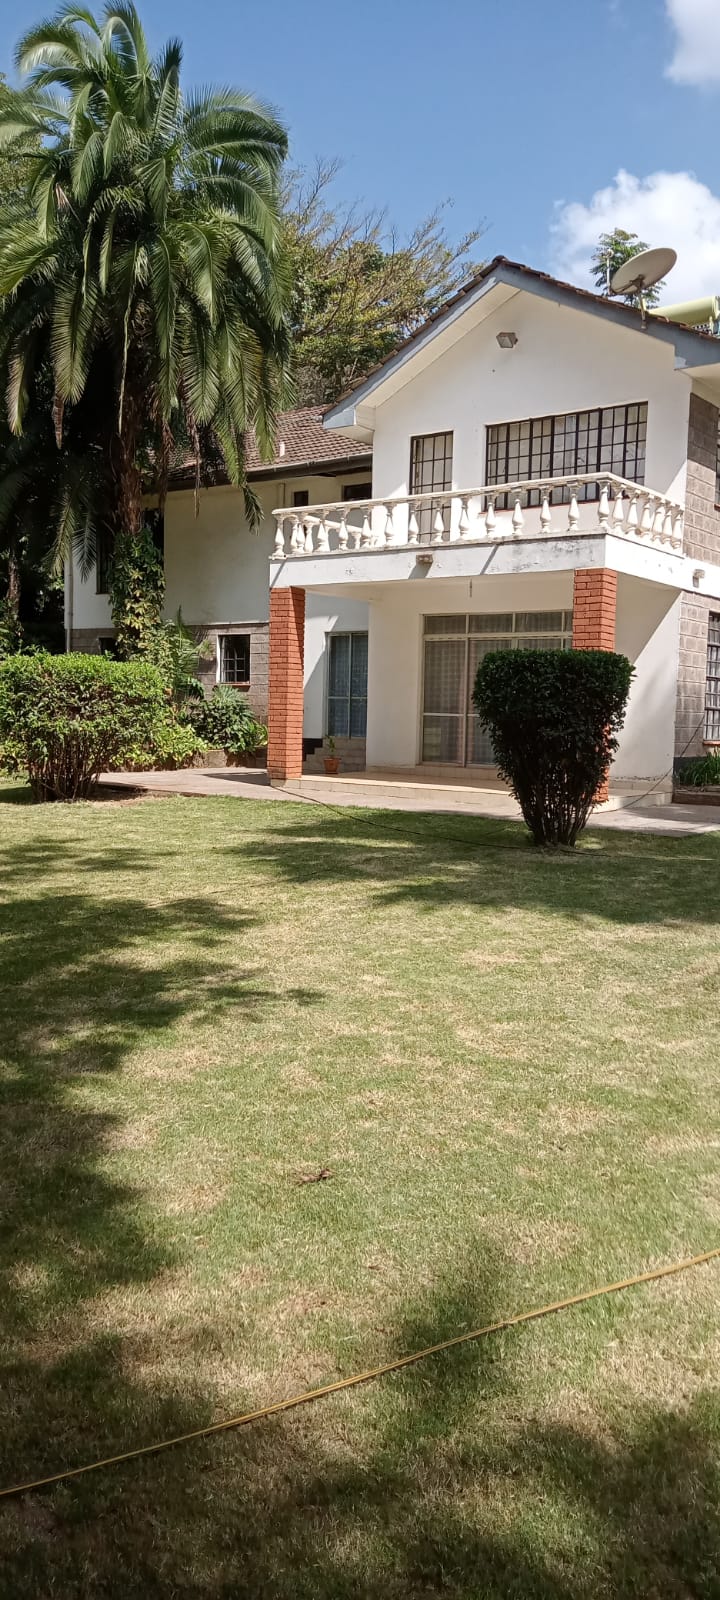 4 Bedroom Double Storey House to Let at Ksh600k Sitting on 34acres with Huge Family Room, Tv Room, Study Room, Terrace, Mature and Well-Kept Garden and more amenities (21)